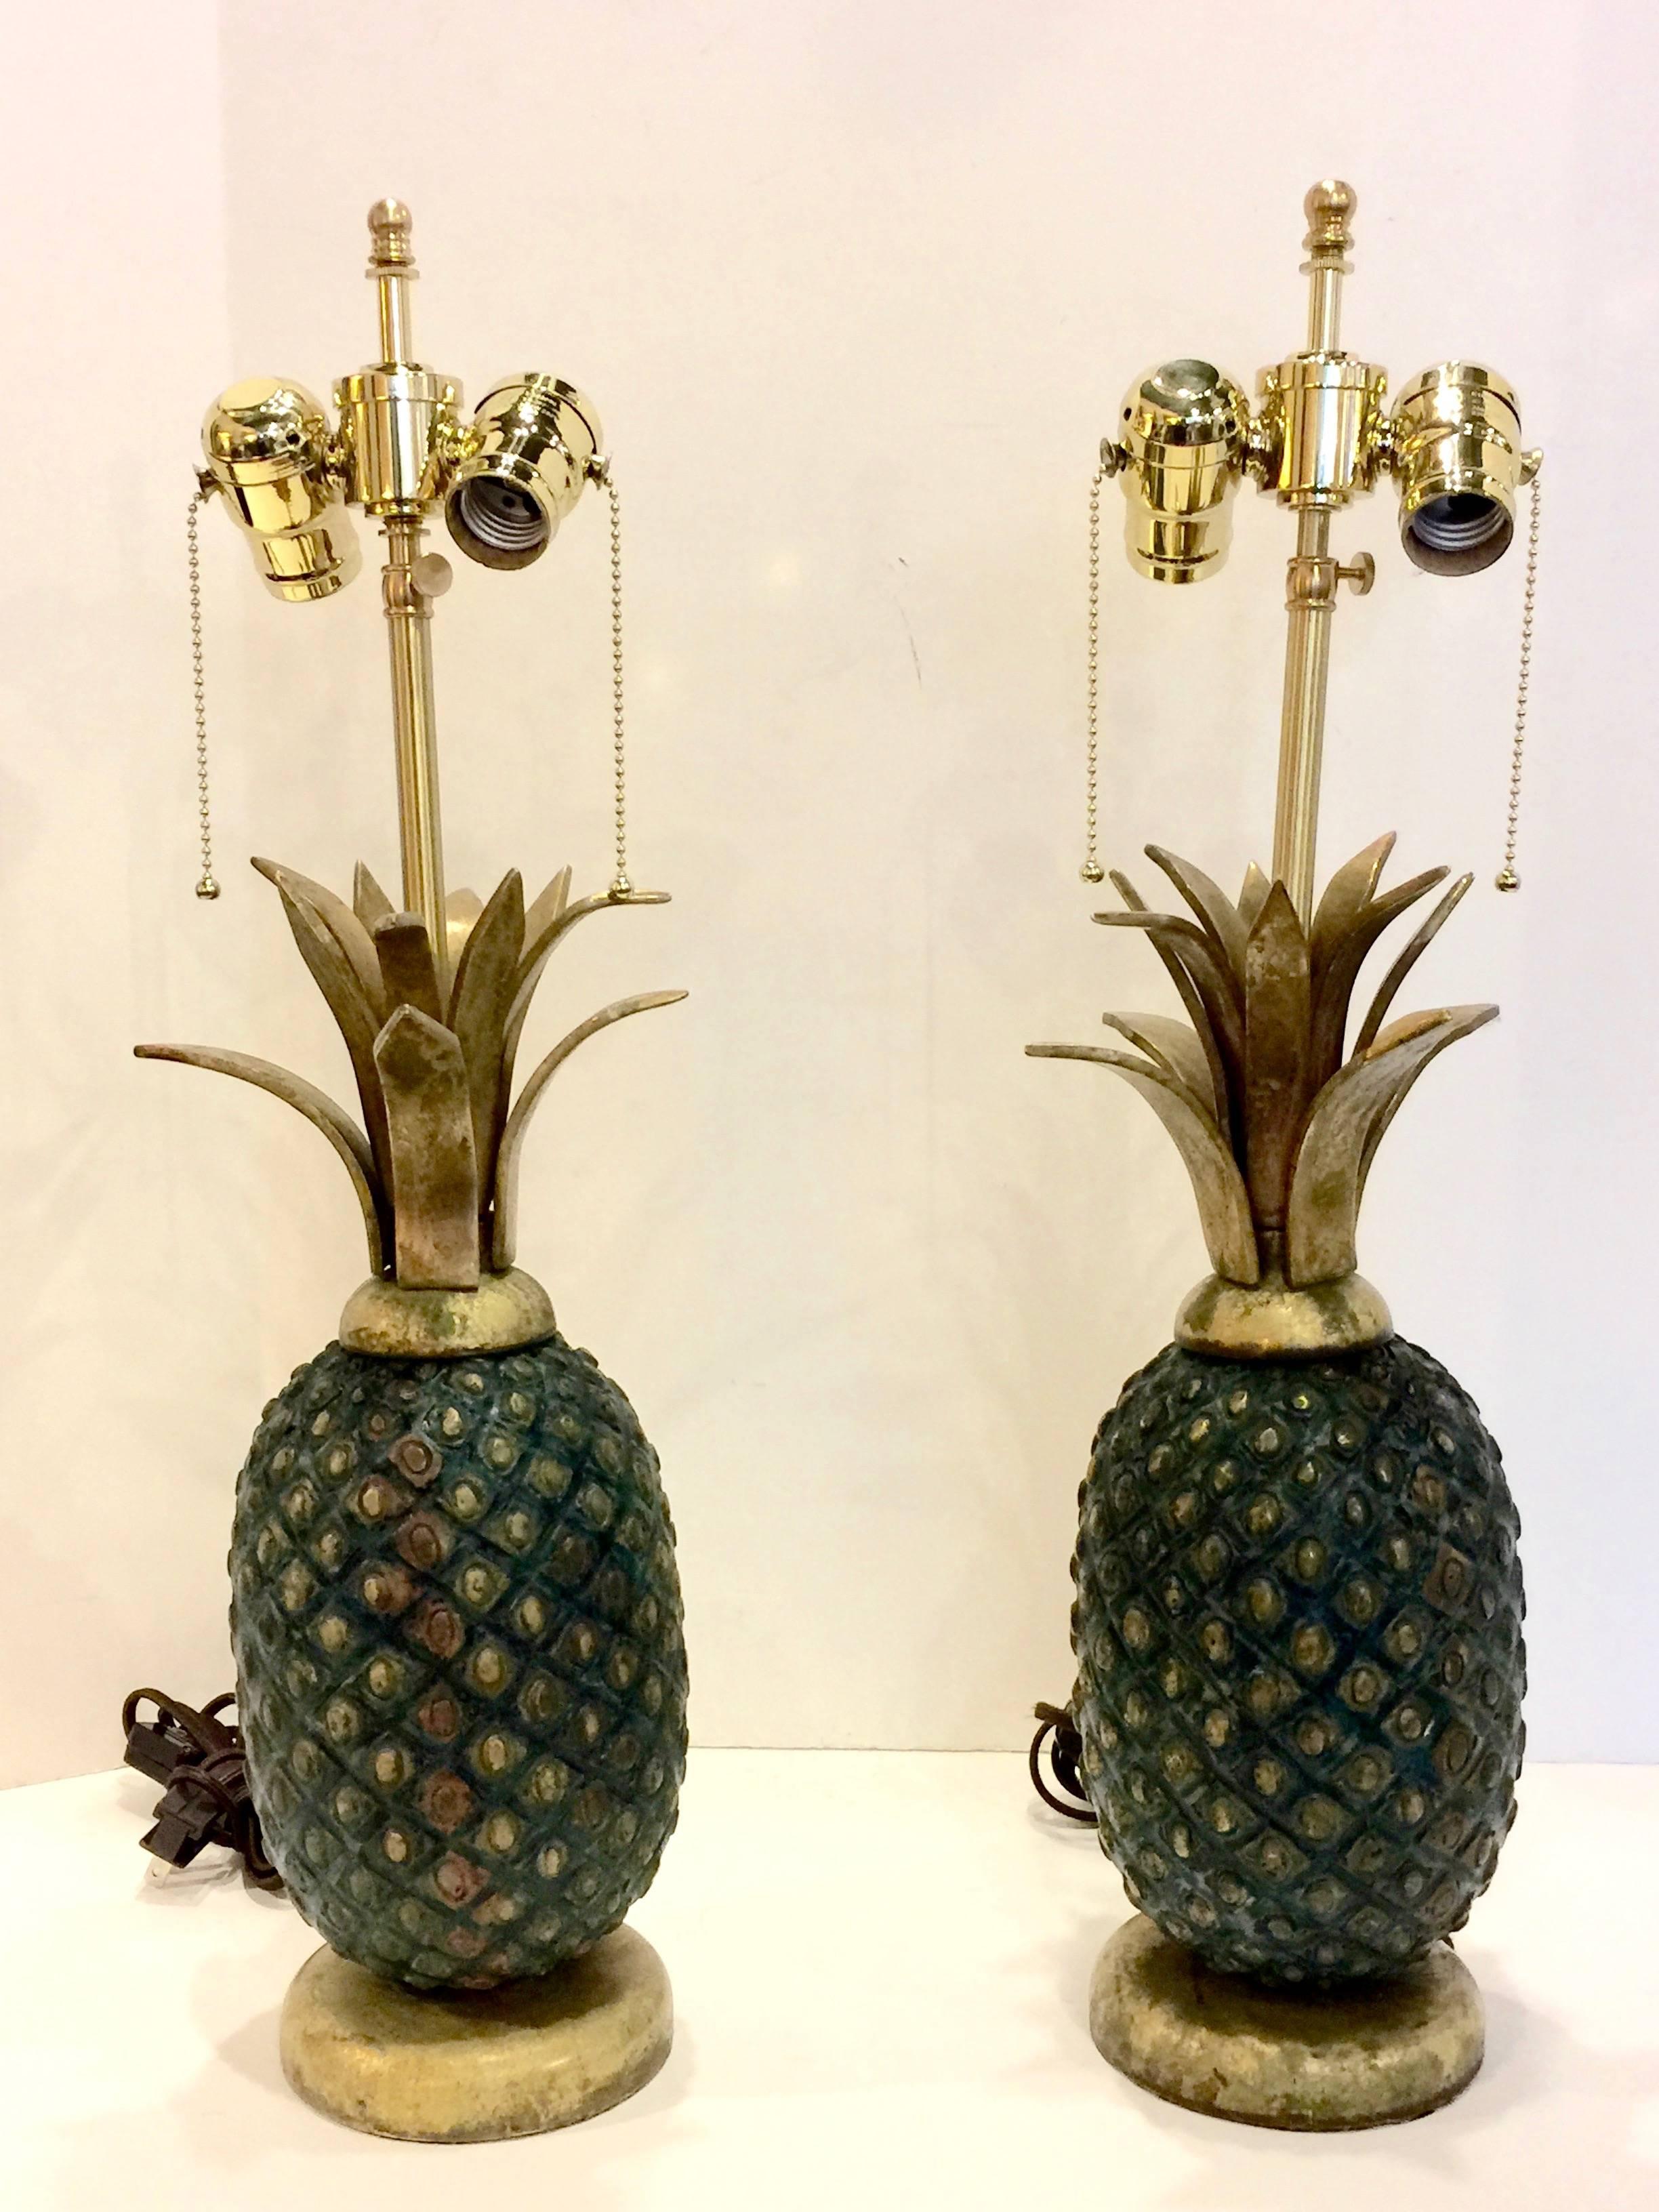 This is a superb pair of pineapple lamps by the famed Mexican modernist master, Pepe Mendoza. These heavy lamps were crafted in solid brass and are in excellent original condition with the exception of updating with new top quality electrical